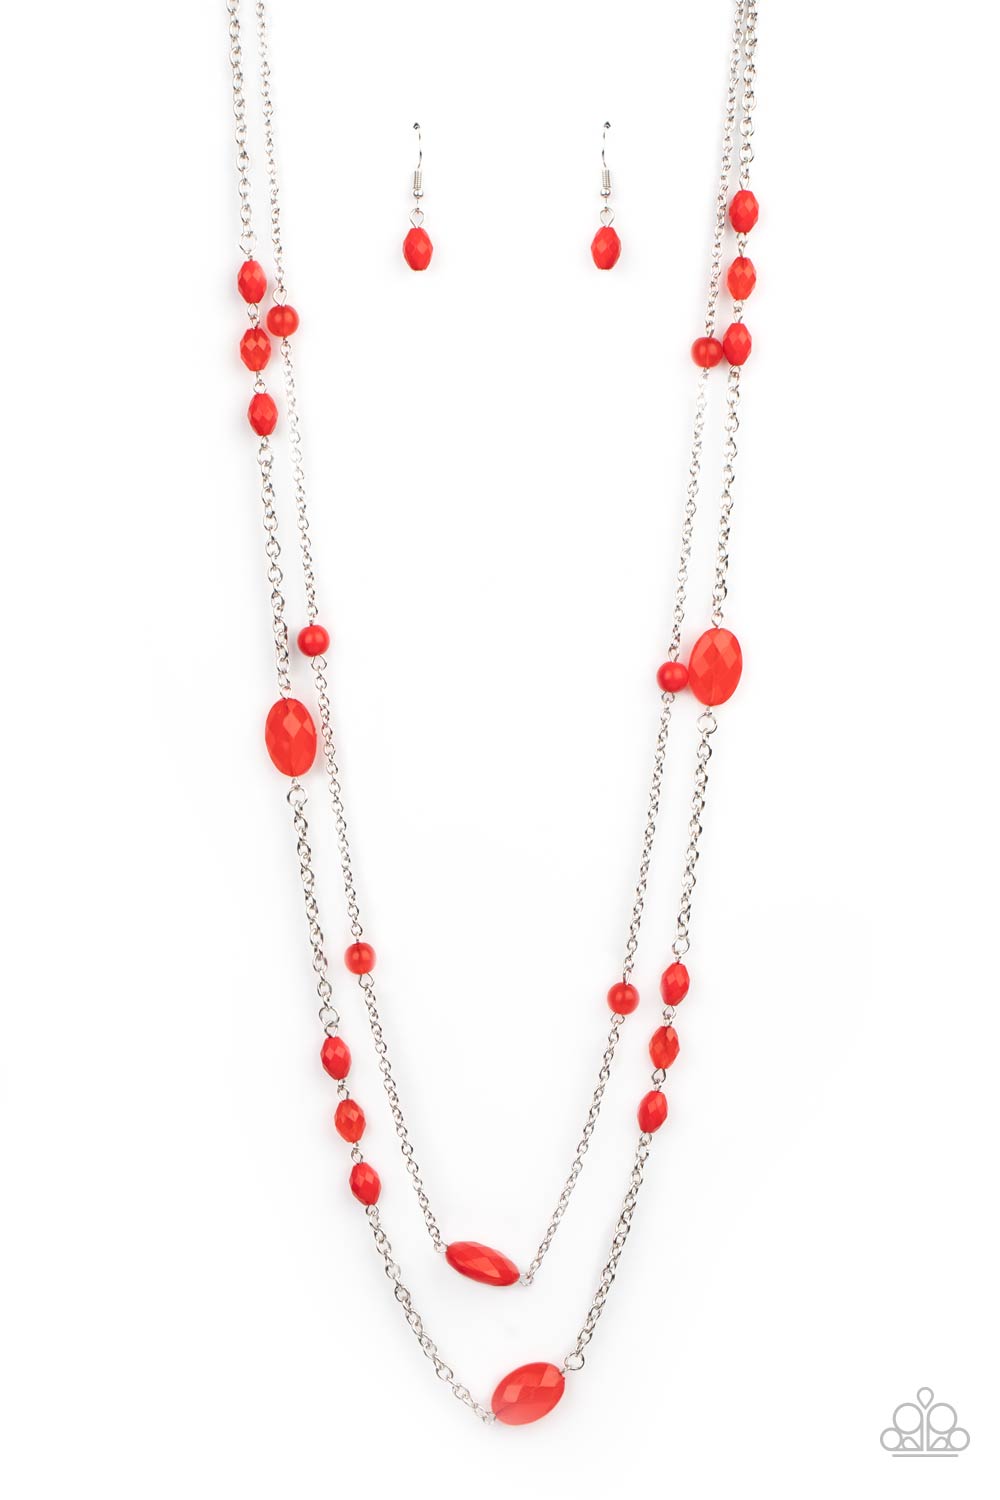 Day Trip Delights - Red Bead Necklace